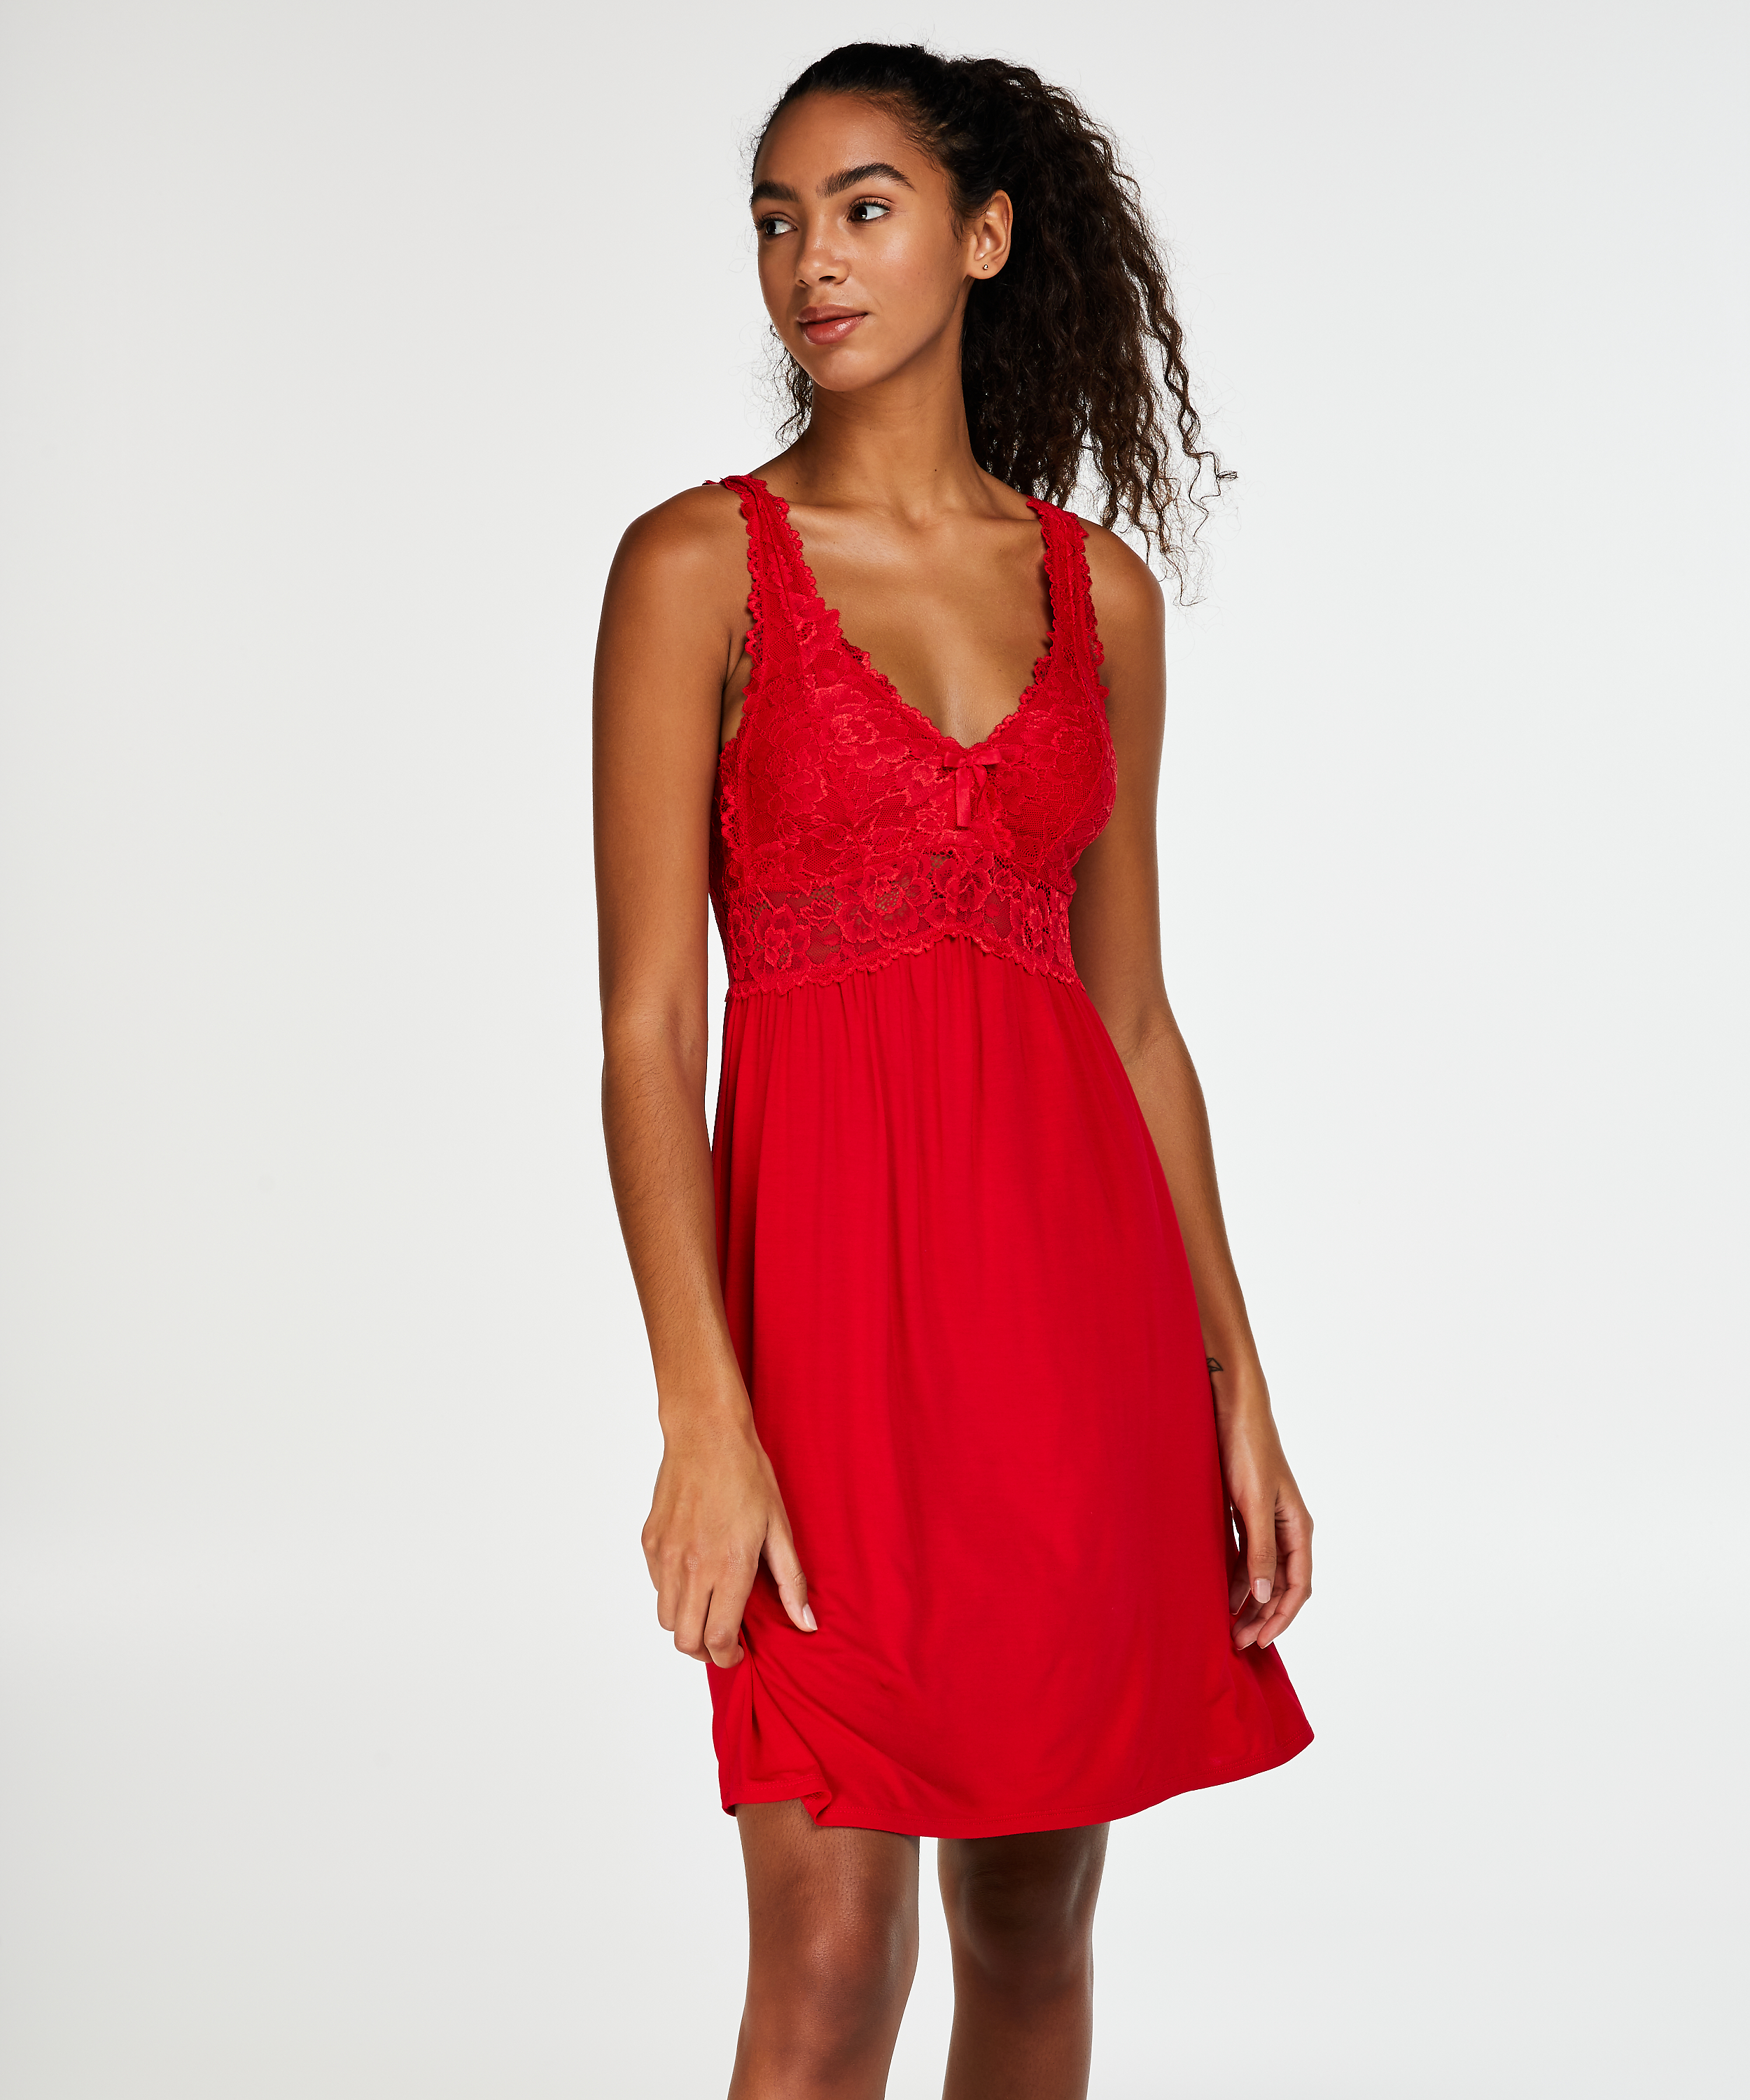 Nuisette Modal Lace, Rouge, main